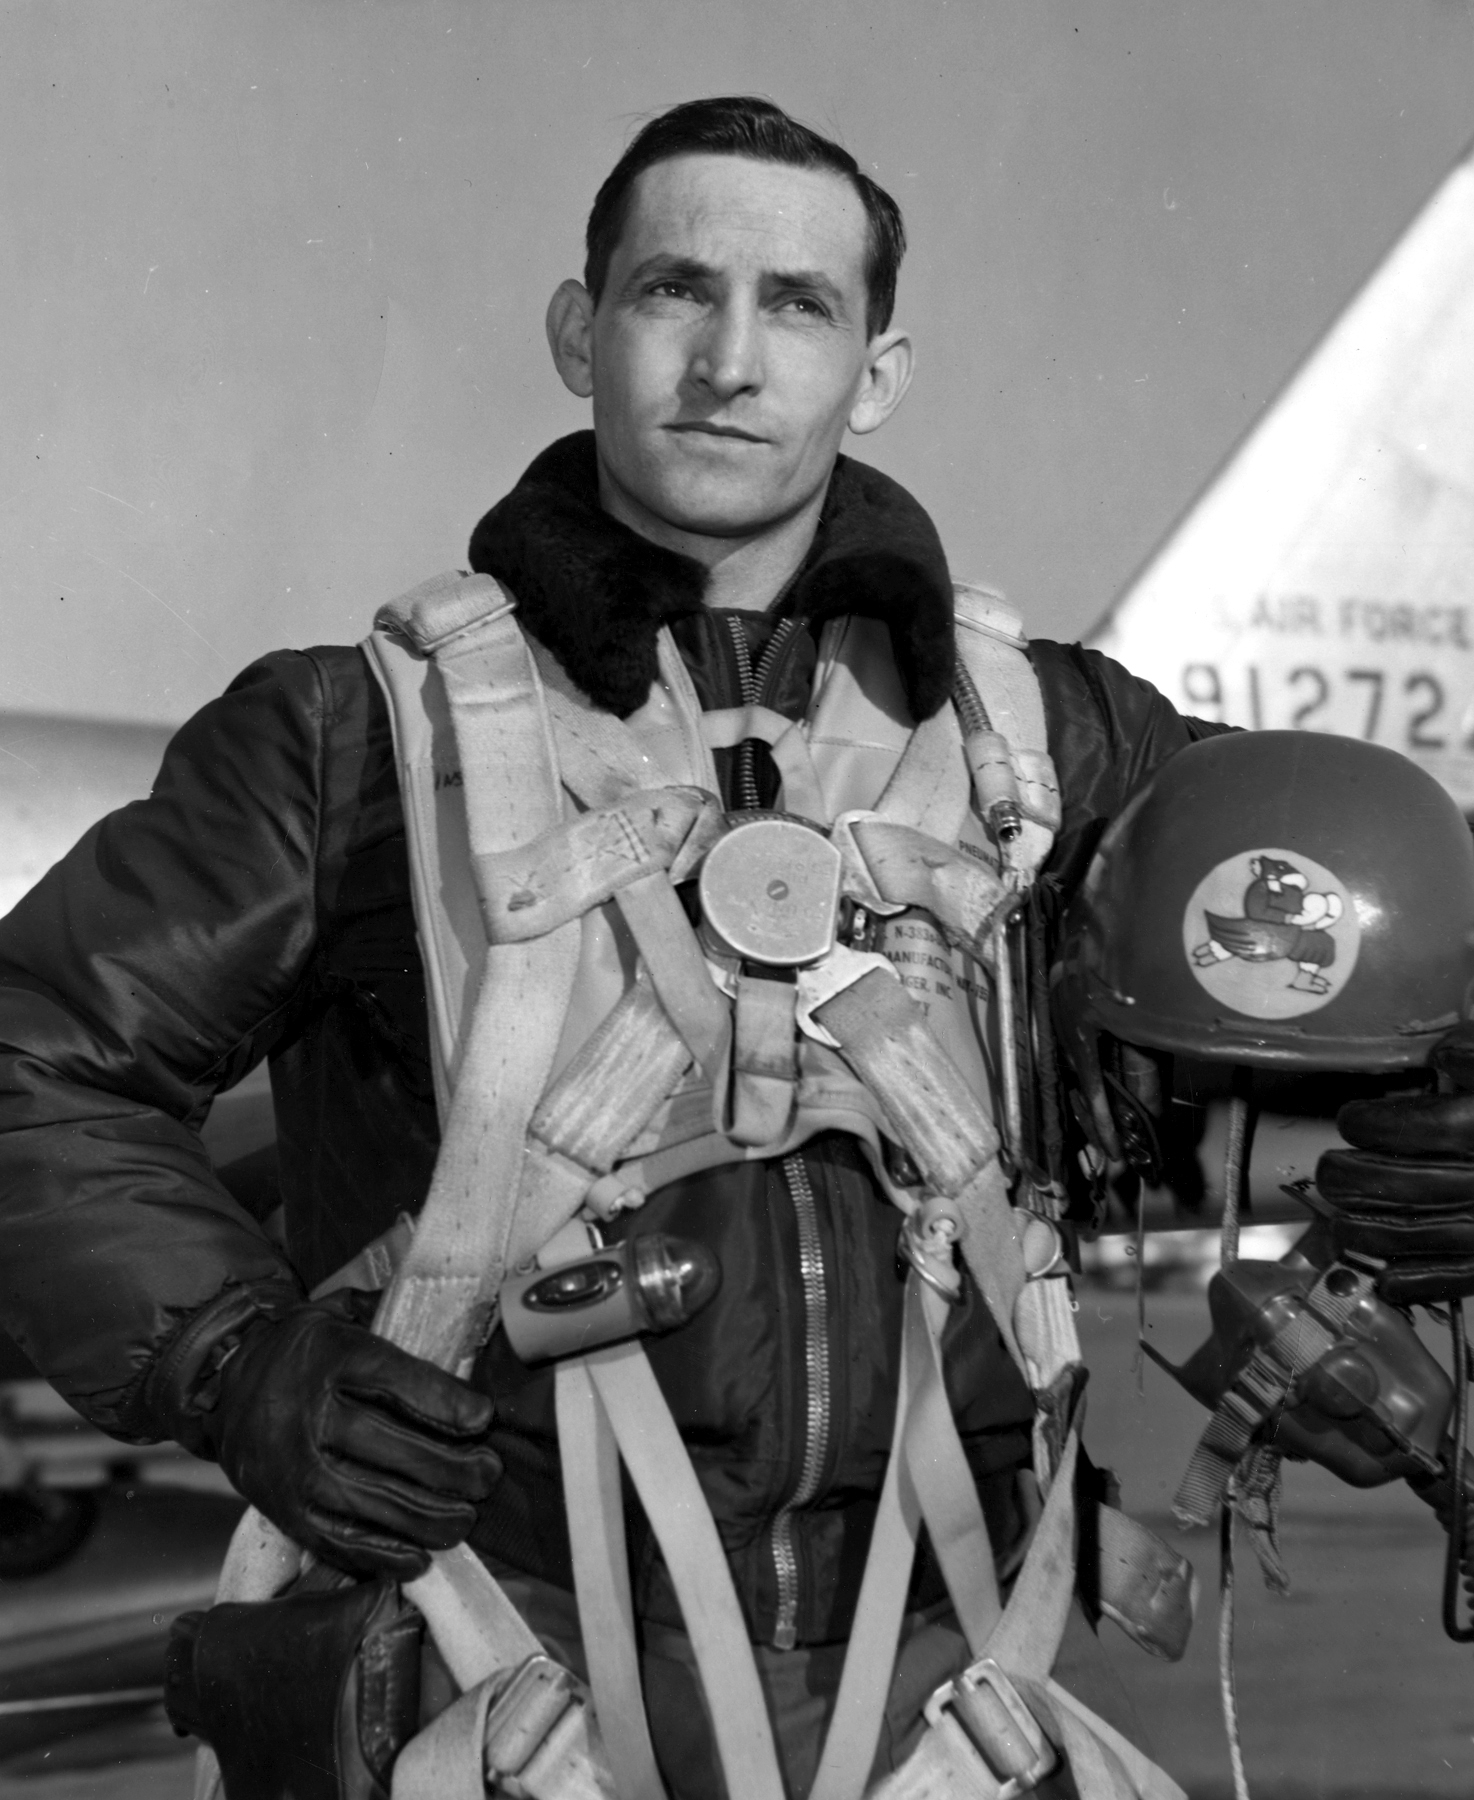 Major George A. Davis, Jr., commanding officer, 334th Fighter Interceptor Squadron, 4th Fighter Interceptor Wing, 5th Air Force, Kimpo Air Base, Korea, 1952. The airplane behind Davis is North American Aviation F-86A-5-NA Sabre 49-1272. It is on display at the Fresno Air Terminal, Fresno, California. (U.S. Air Force)